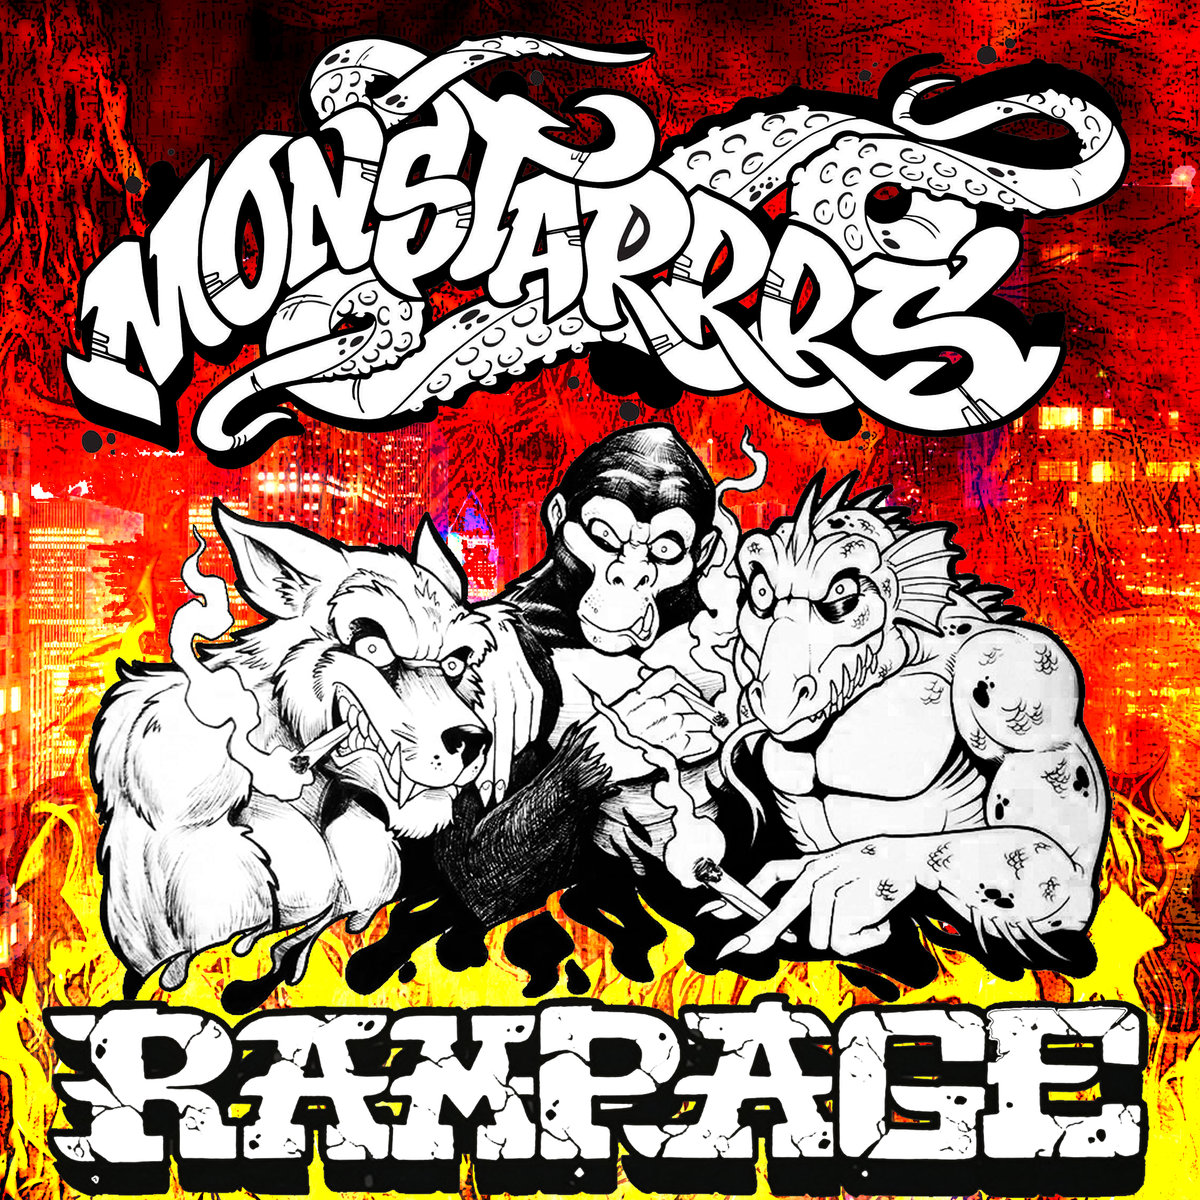 THE MONSTARRRS - "Rampage" (Release)